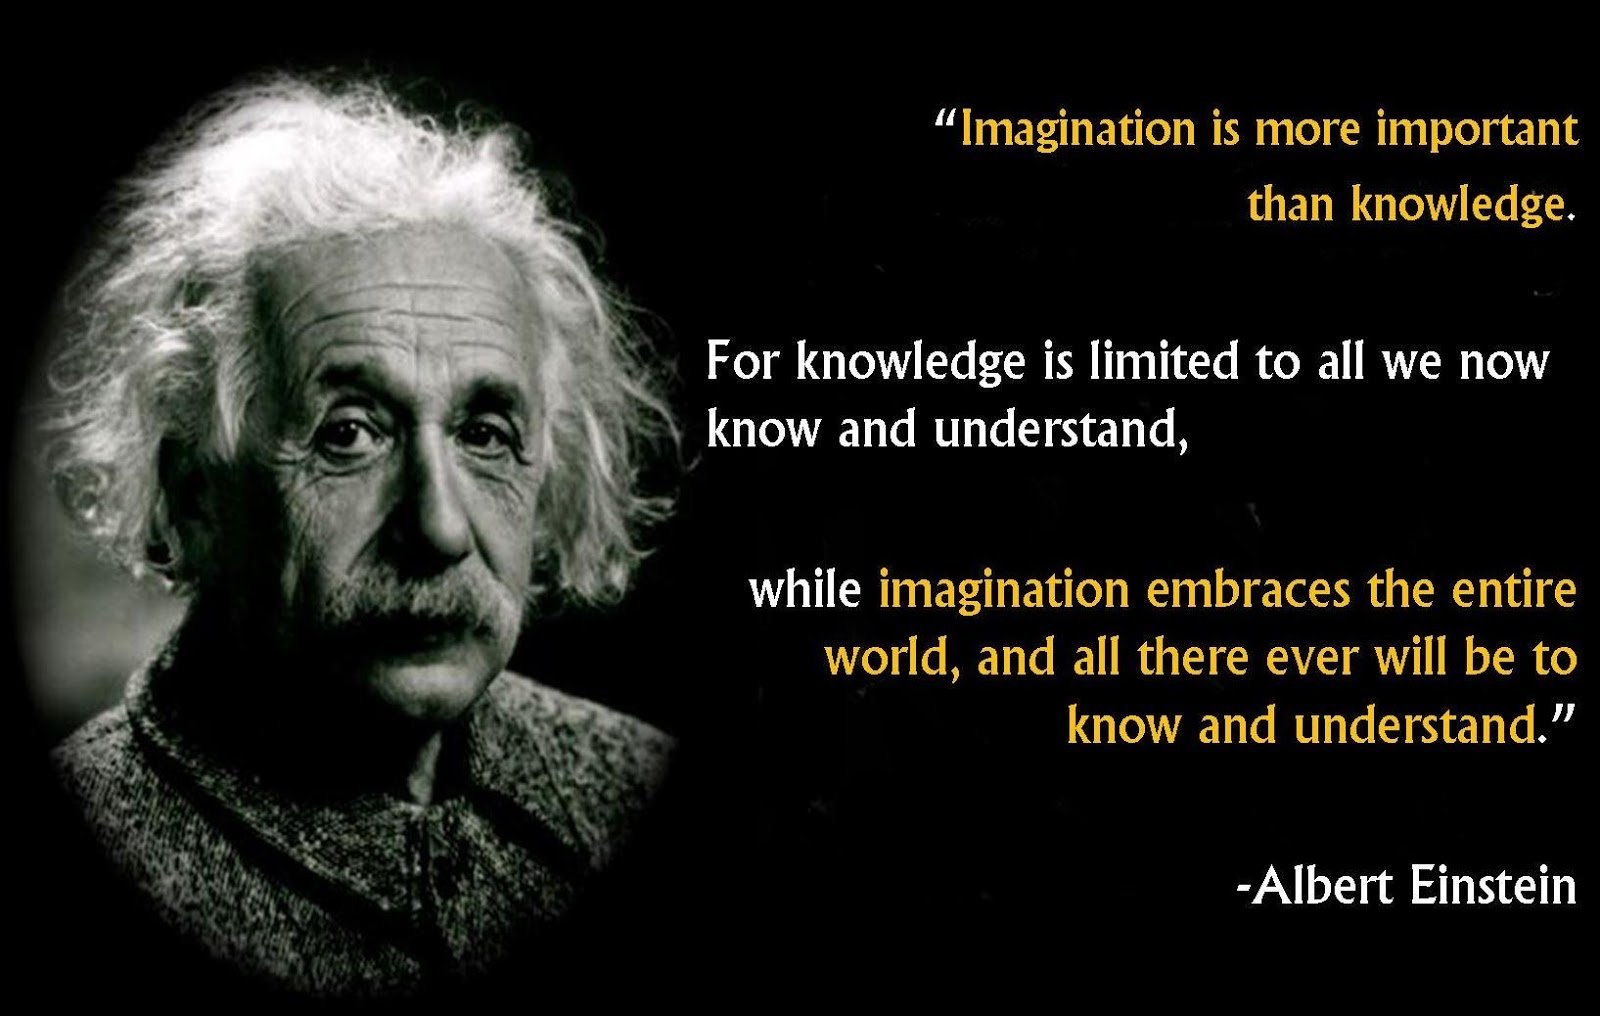 Albert Einstein: Top 10 quotes of the father of modern physics